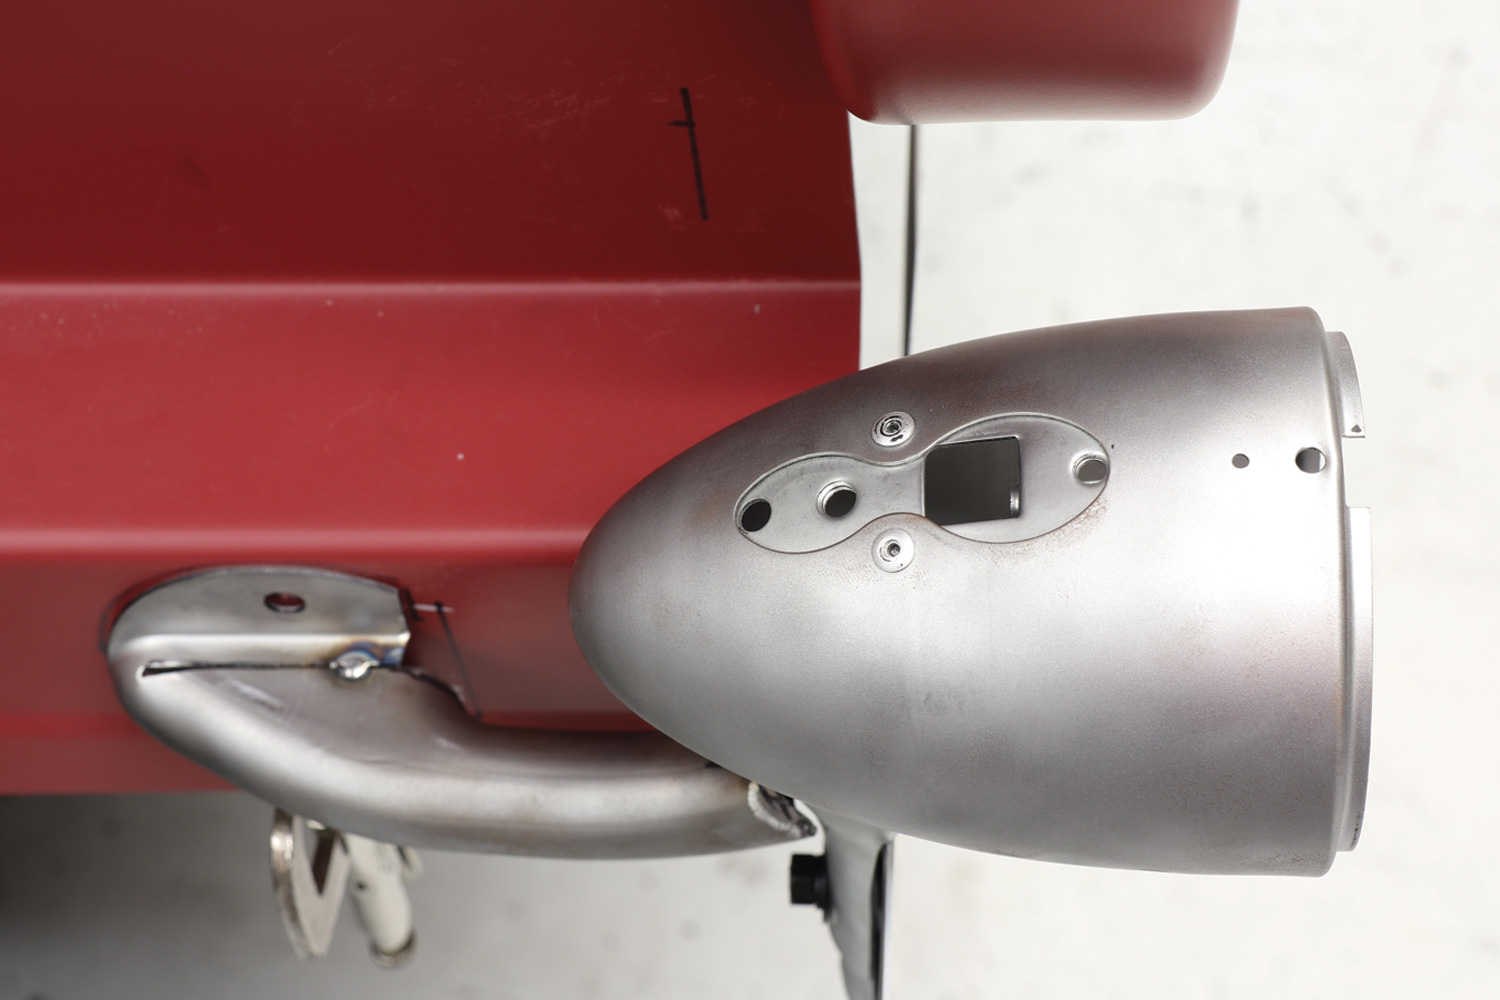 the taillight housing is test-fitted to the mounting stem